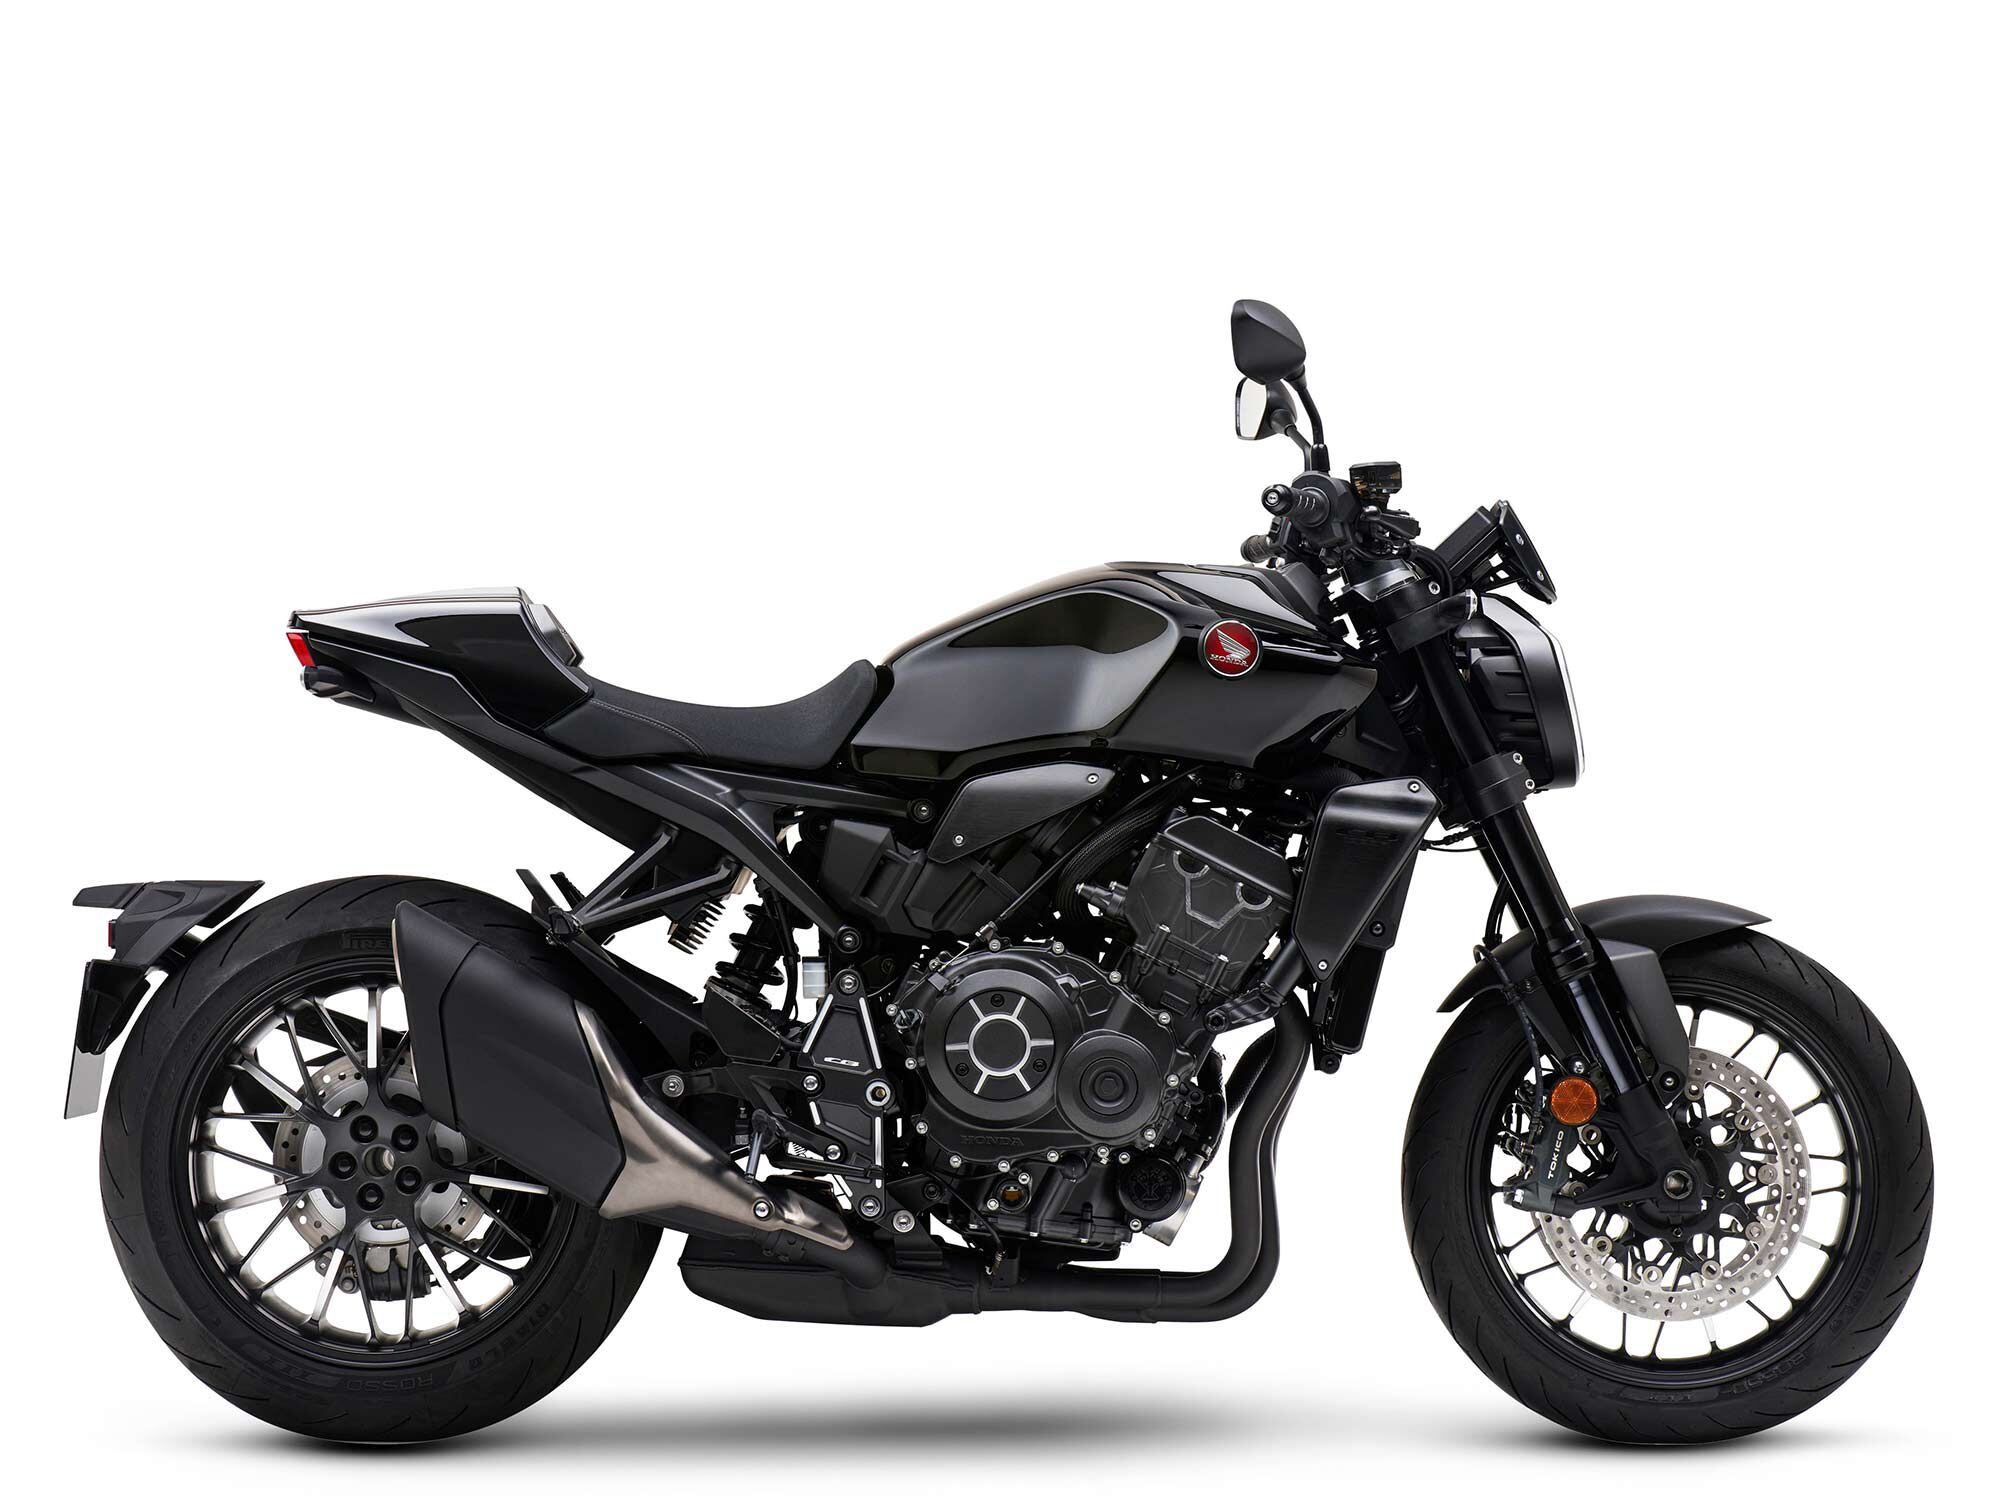 The 2022 CB1000R Black Edition has the implied blacked-out looks with small highlights of aluminum throughout.